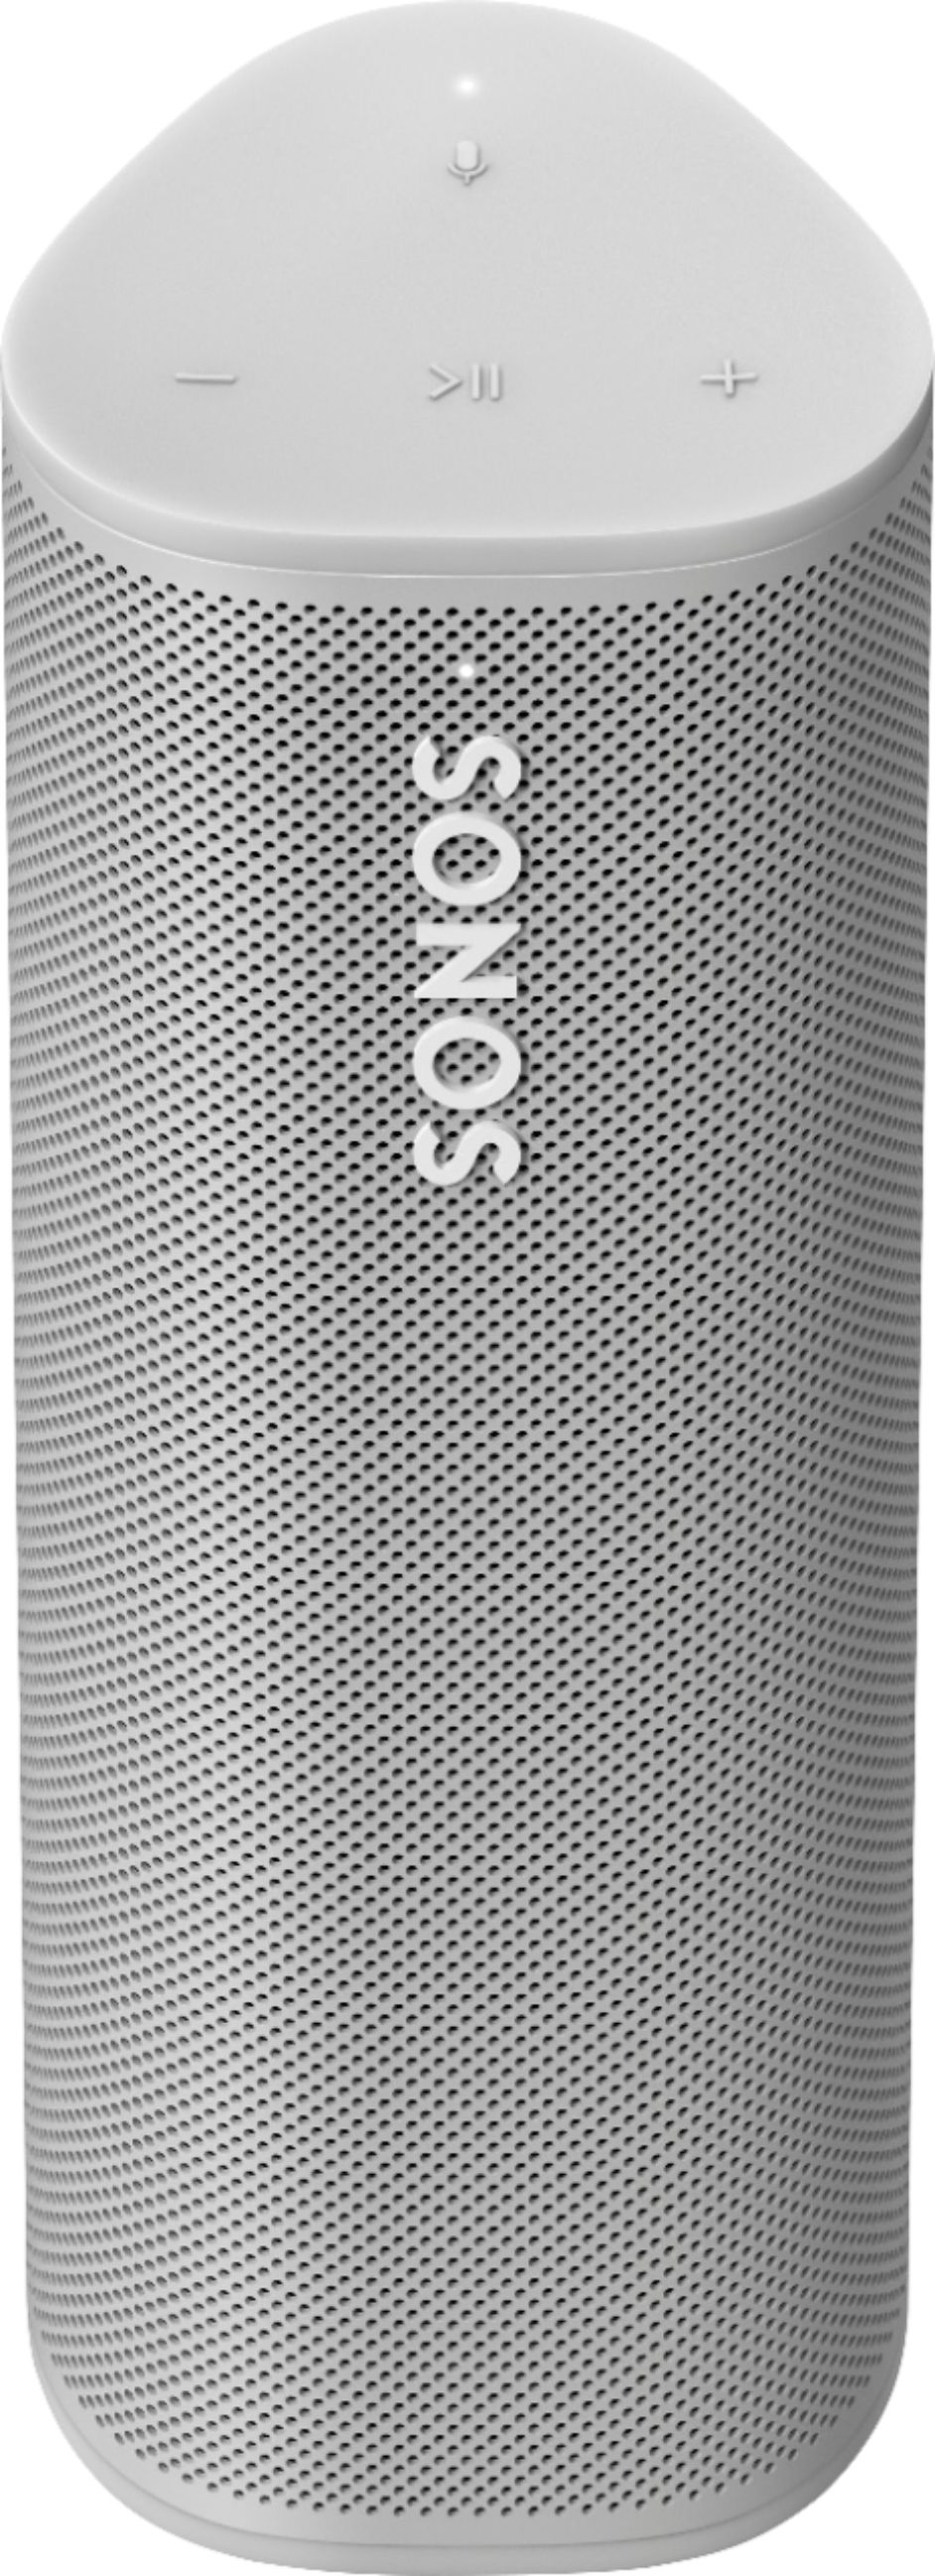 Sonos – Roam Smart Portable Wi-Fi and Bluetooth Speaker with Amazon Alexa and Google Assistant – White